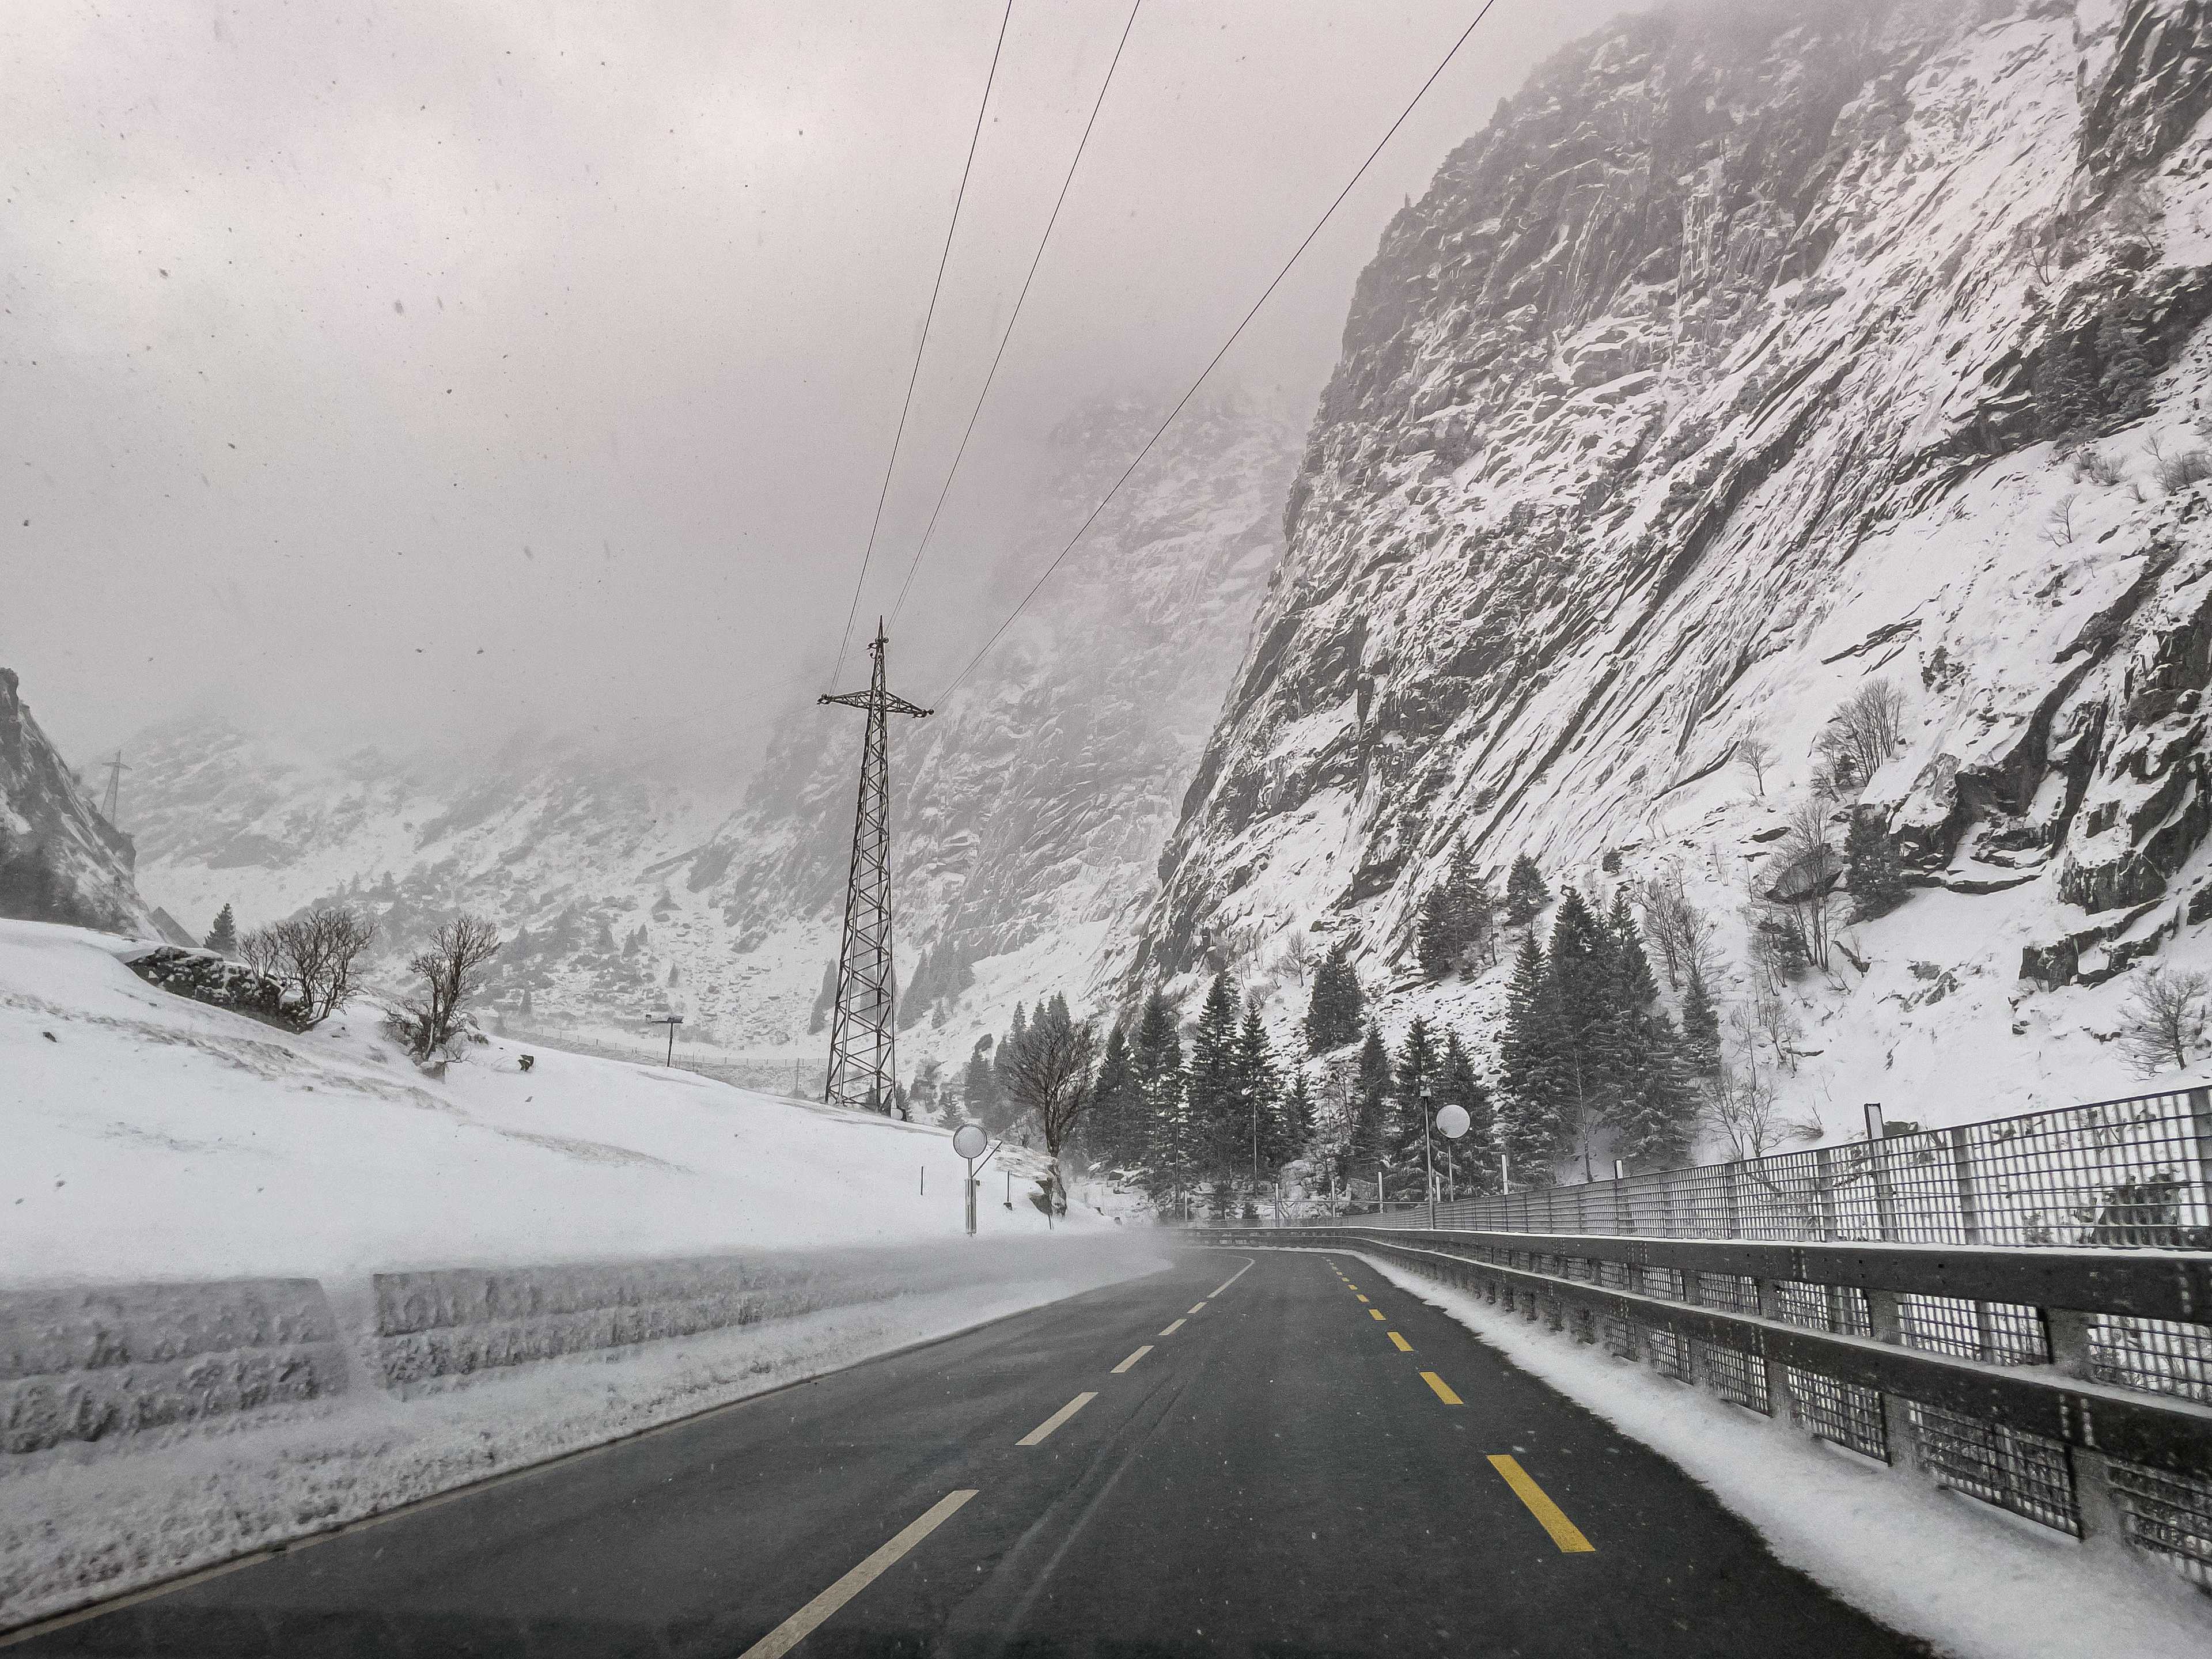 Gotthard and Furka passes access road leading to Andermatt